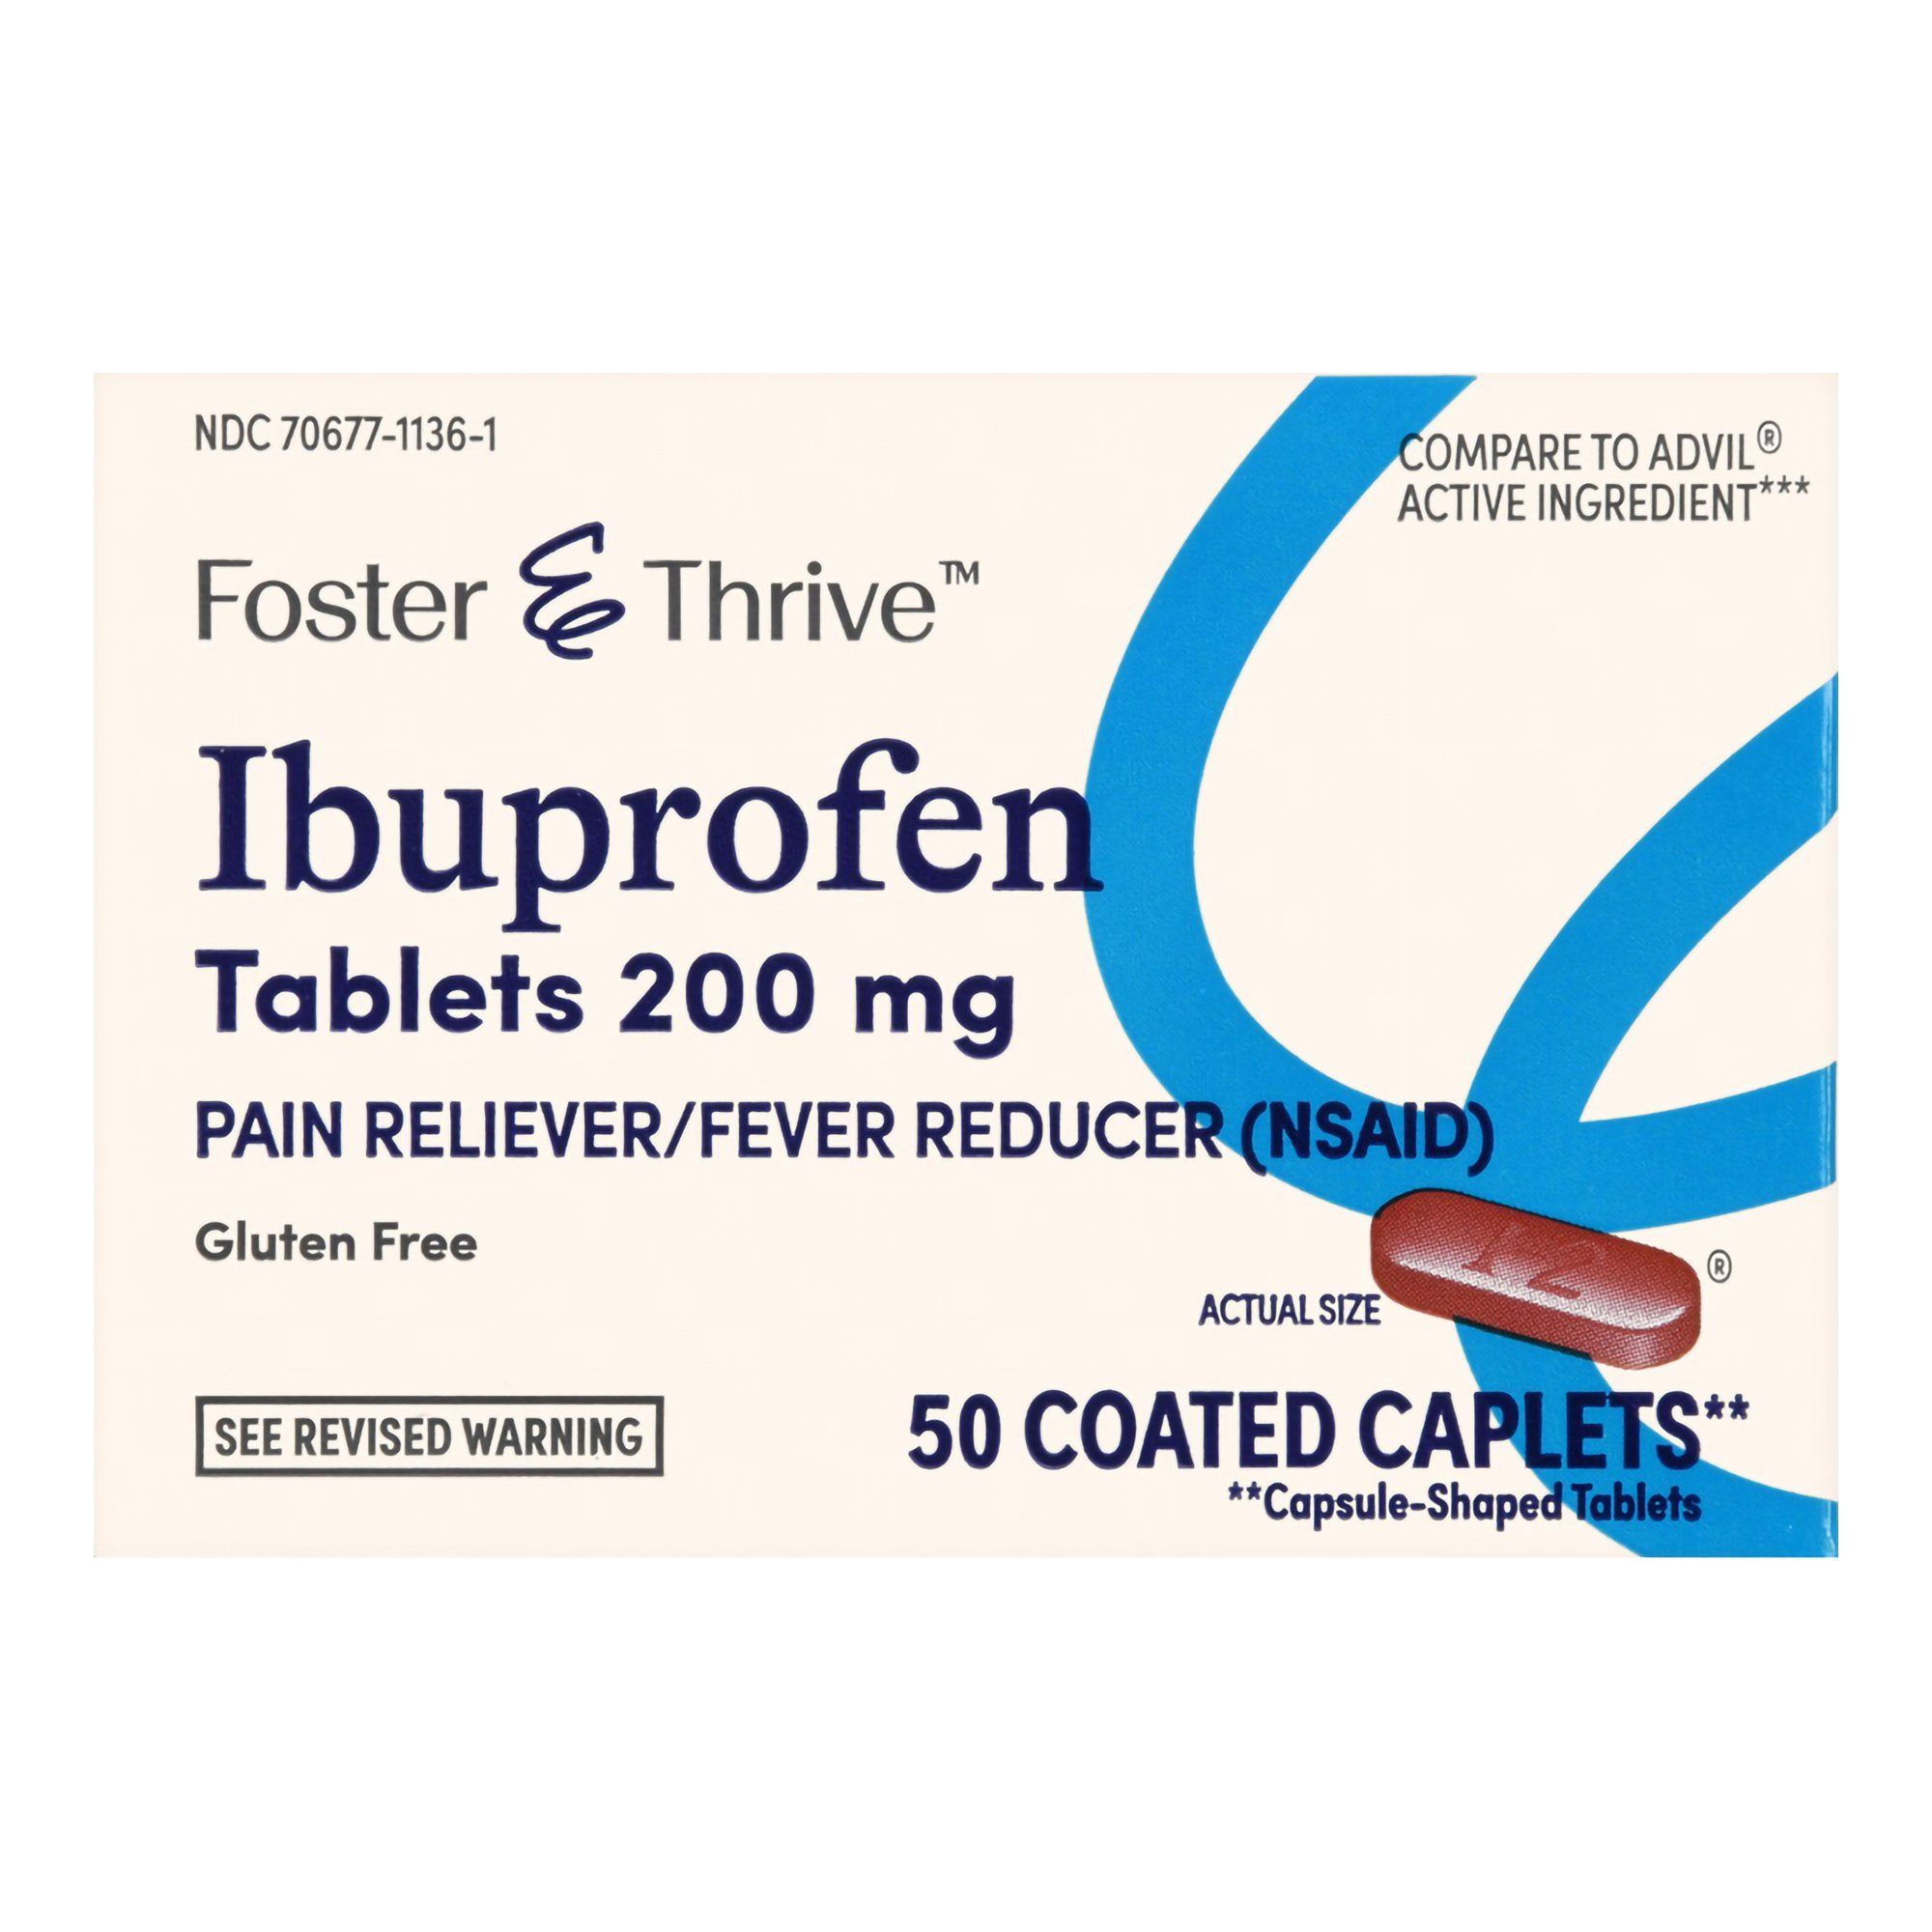 Foster & Thrive Ibuprofen Coated Caplets, 200 mg - 50 ct